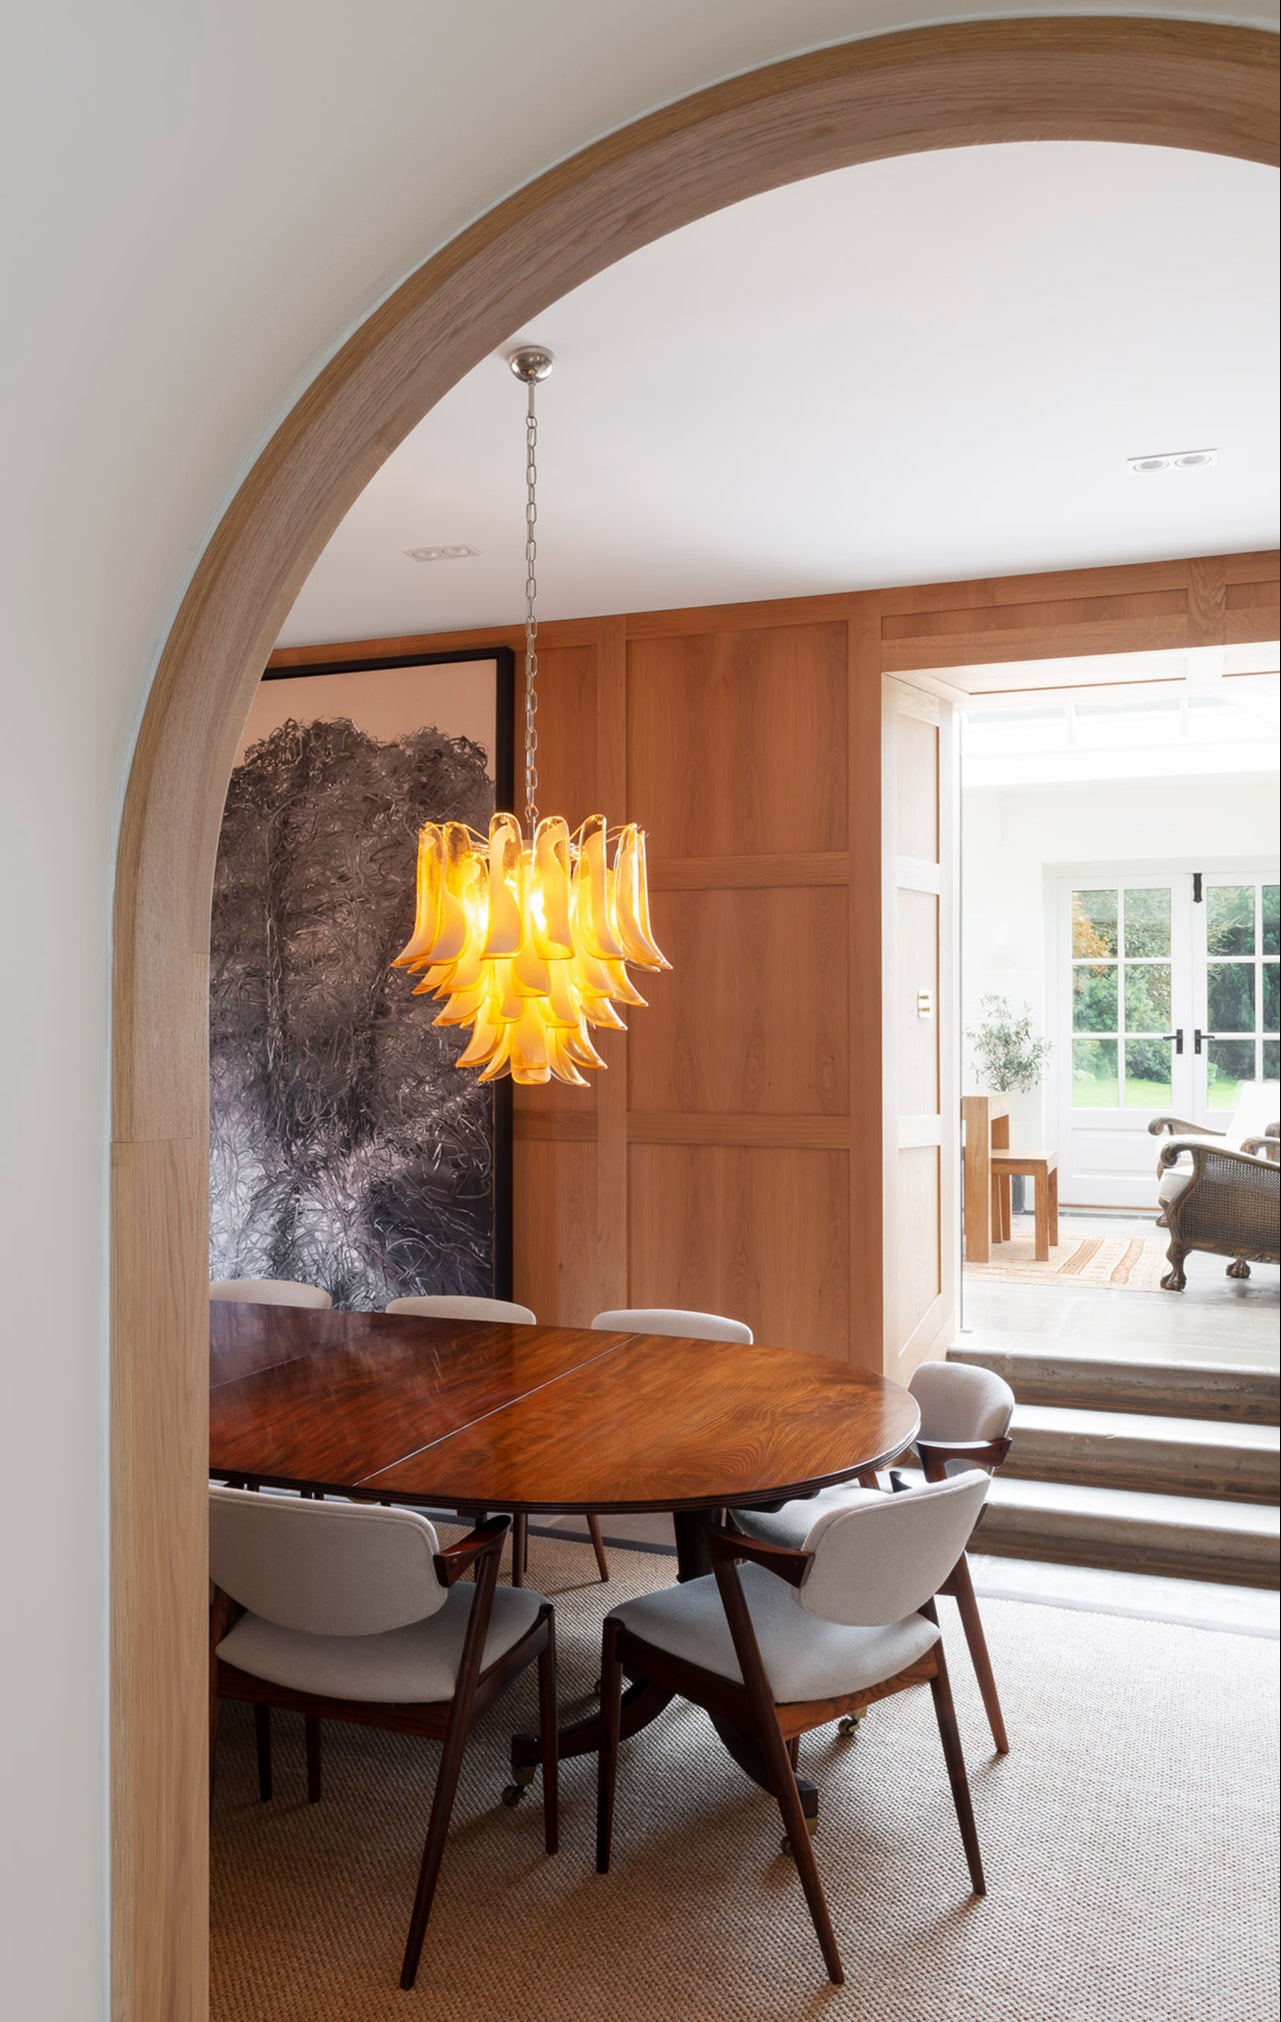 Experts recommend pairing dramatic pendants, such as this one, with statement table lamps